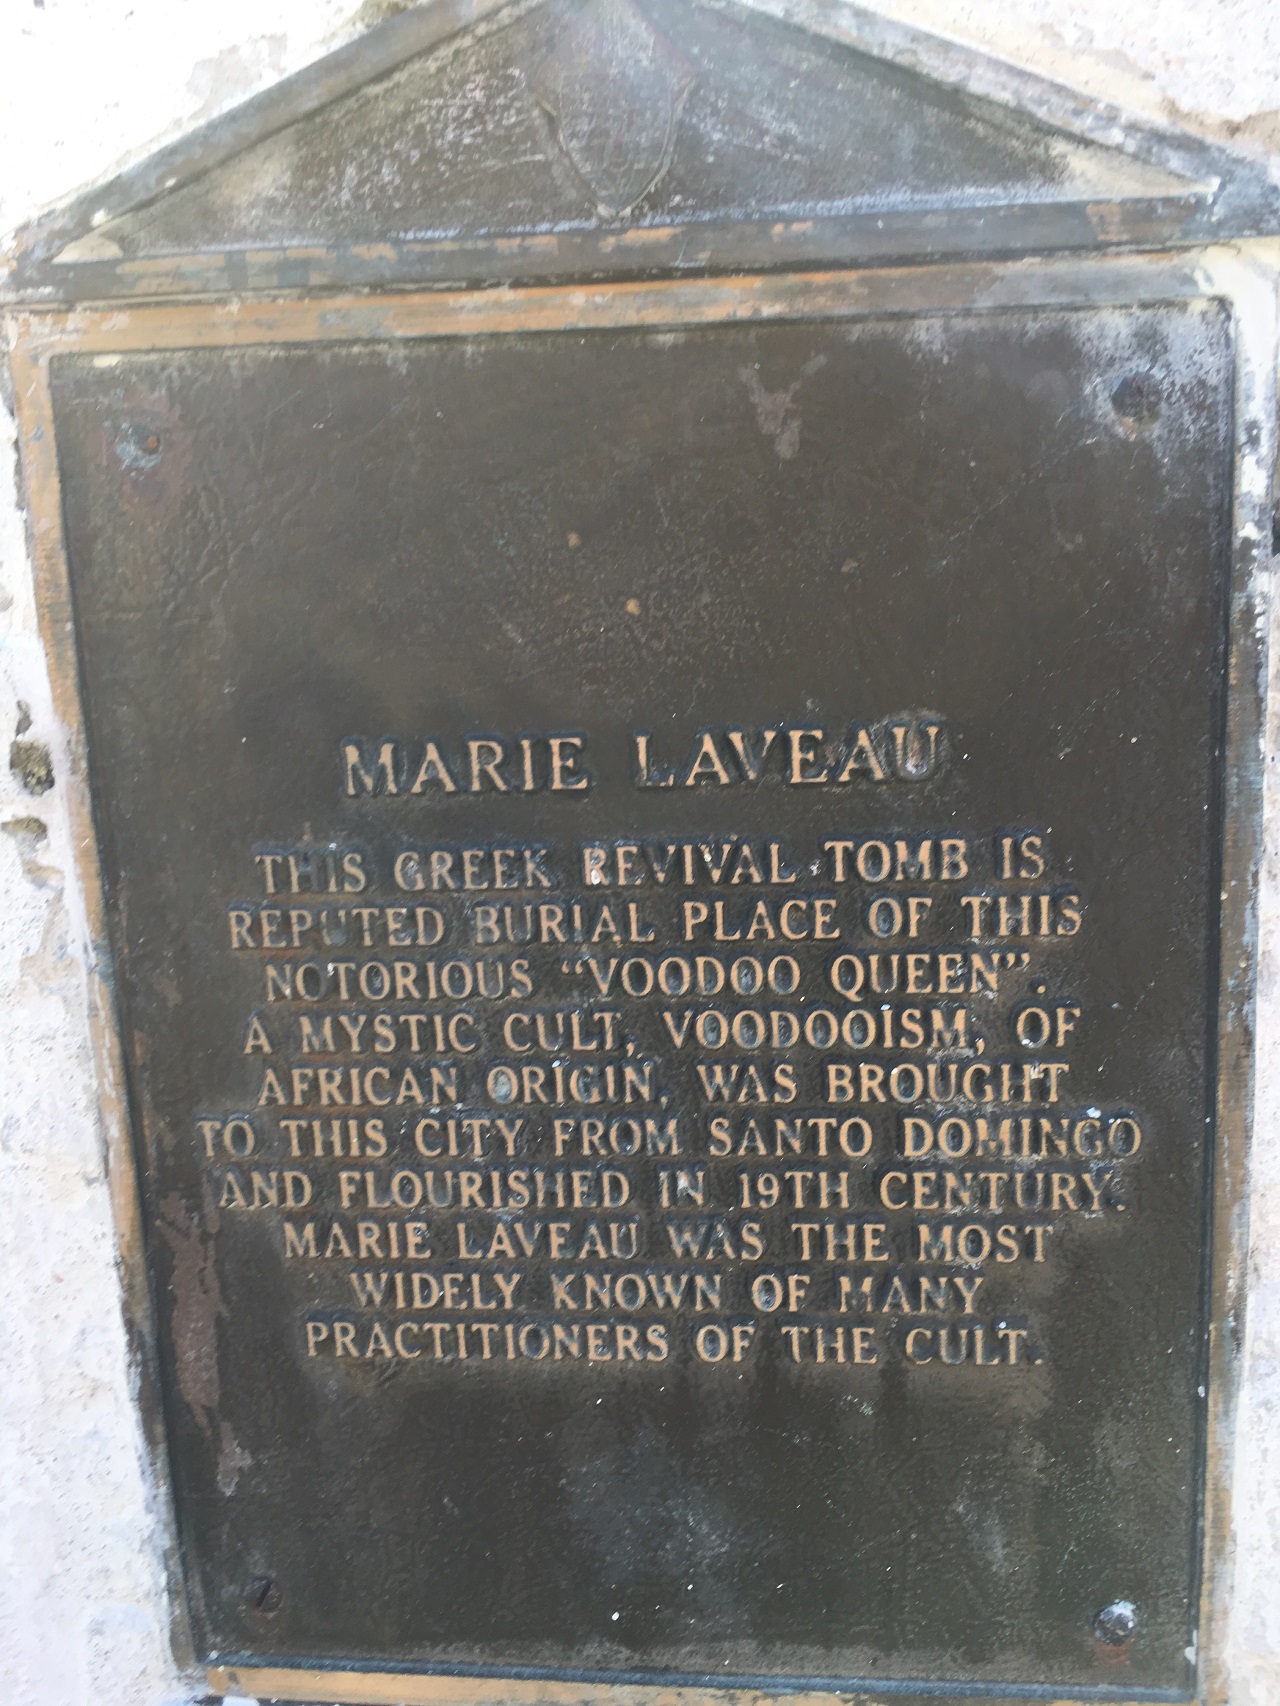 Marie LaVeau's tomb - One of the spooky things to do in New Orleans